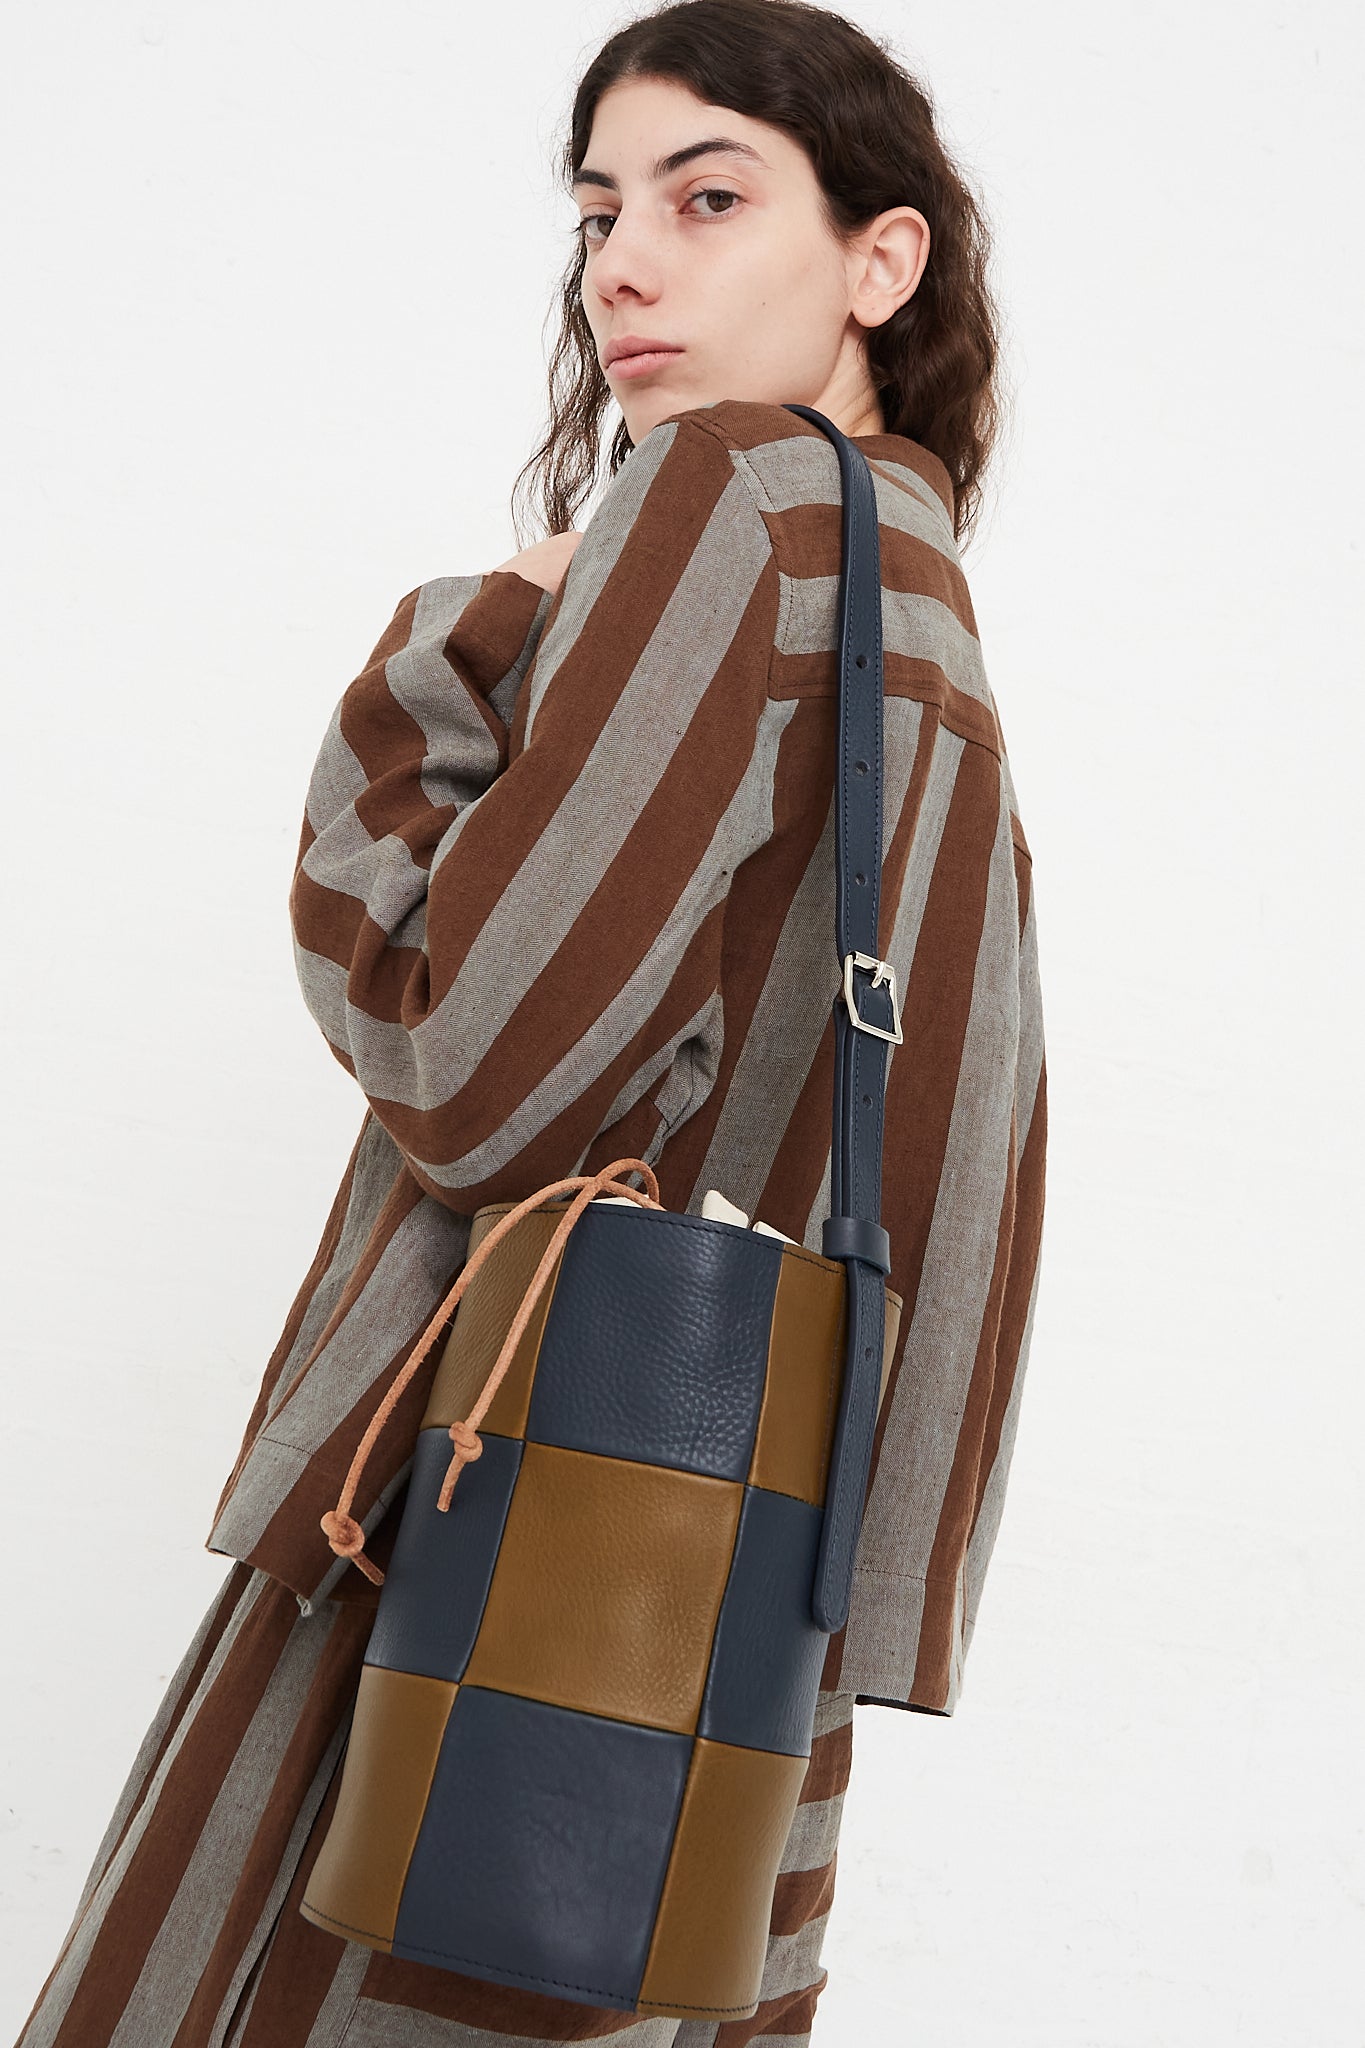 A model holding a bucket bag in a grainy patchwork leather. Features an adjustable strap with silver hardware, and an interior canvas bag with leather tie closure. Side view and upclose. Draped over models shoulder. Designed by Cawley - Oroboro Store